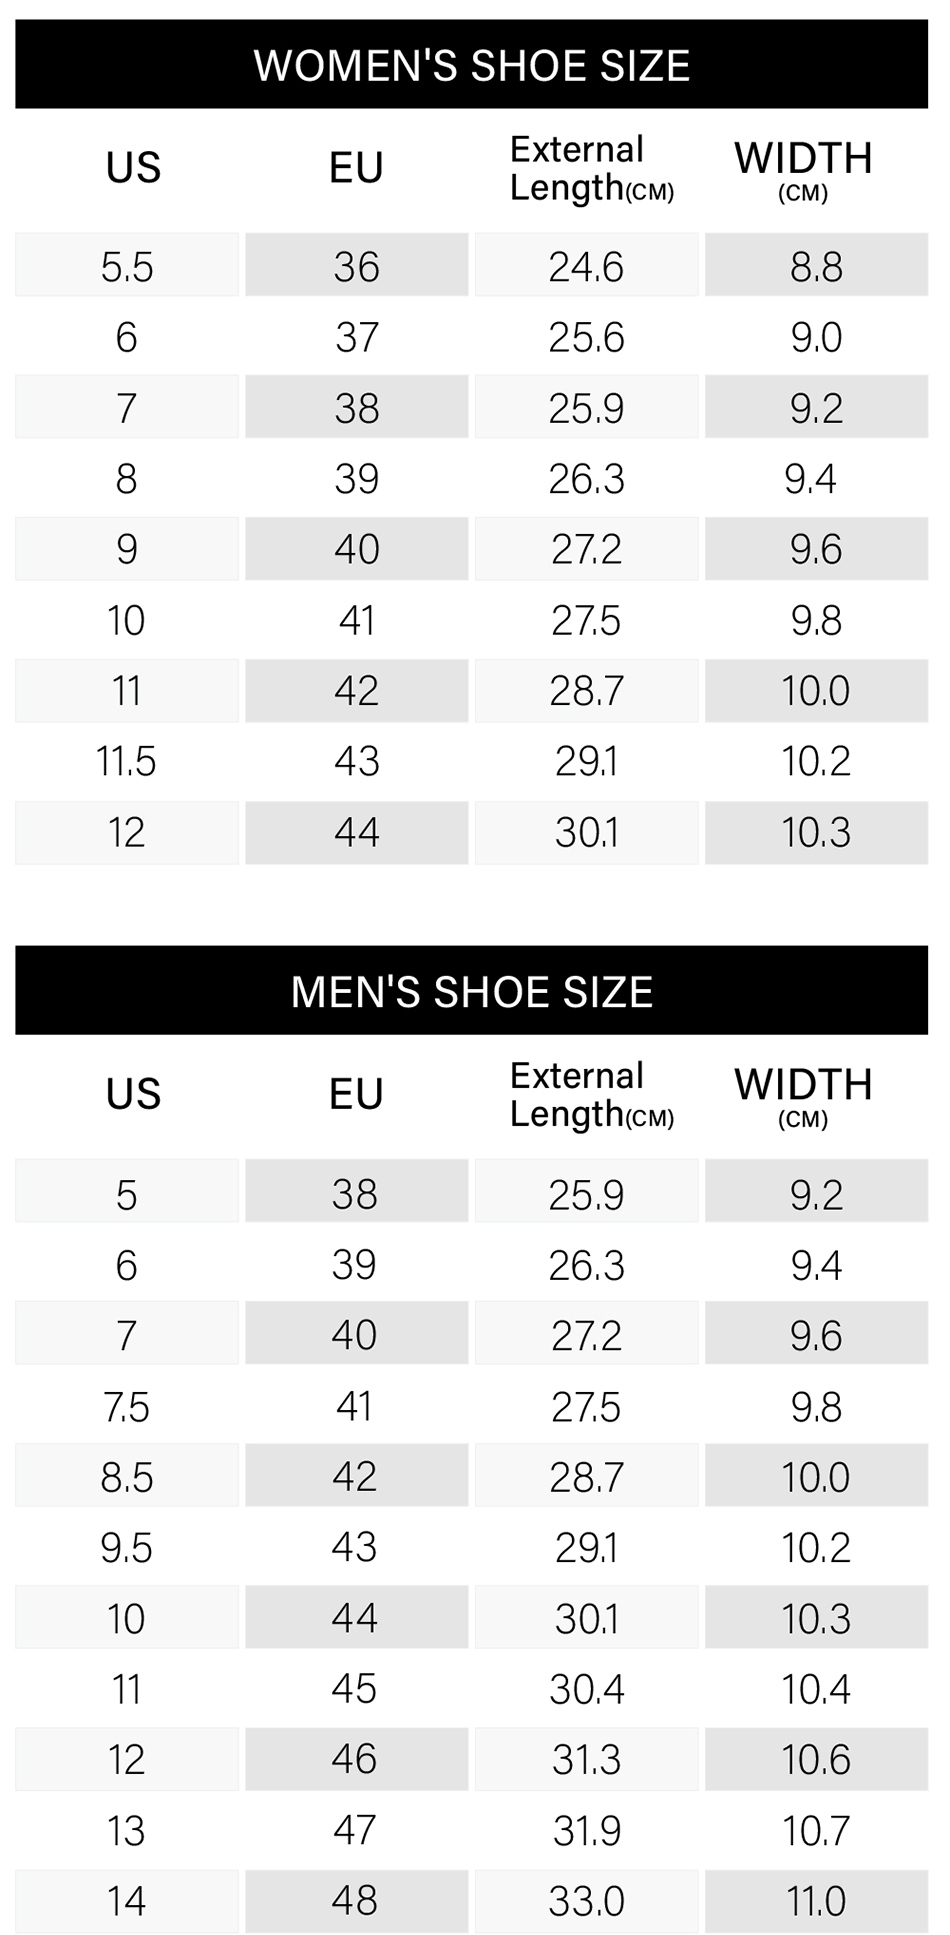 This image displays two shoe size conversion charts, one for women and one for men. The women's chart lists US sizes 5.5 to 12, corresponding Euro sizes 36 to 44, and provides the external length of the shoe in centimeters and width in centimeters. The men's chart lists US sizes 5 to 14, corresponding Euro sizes 38 to 48, with their external lengths and widths in centimeters. Both charts are shaded in alternating grey and white rows for readability.